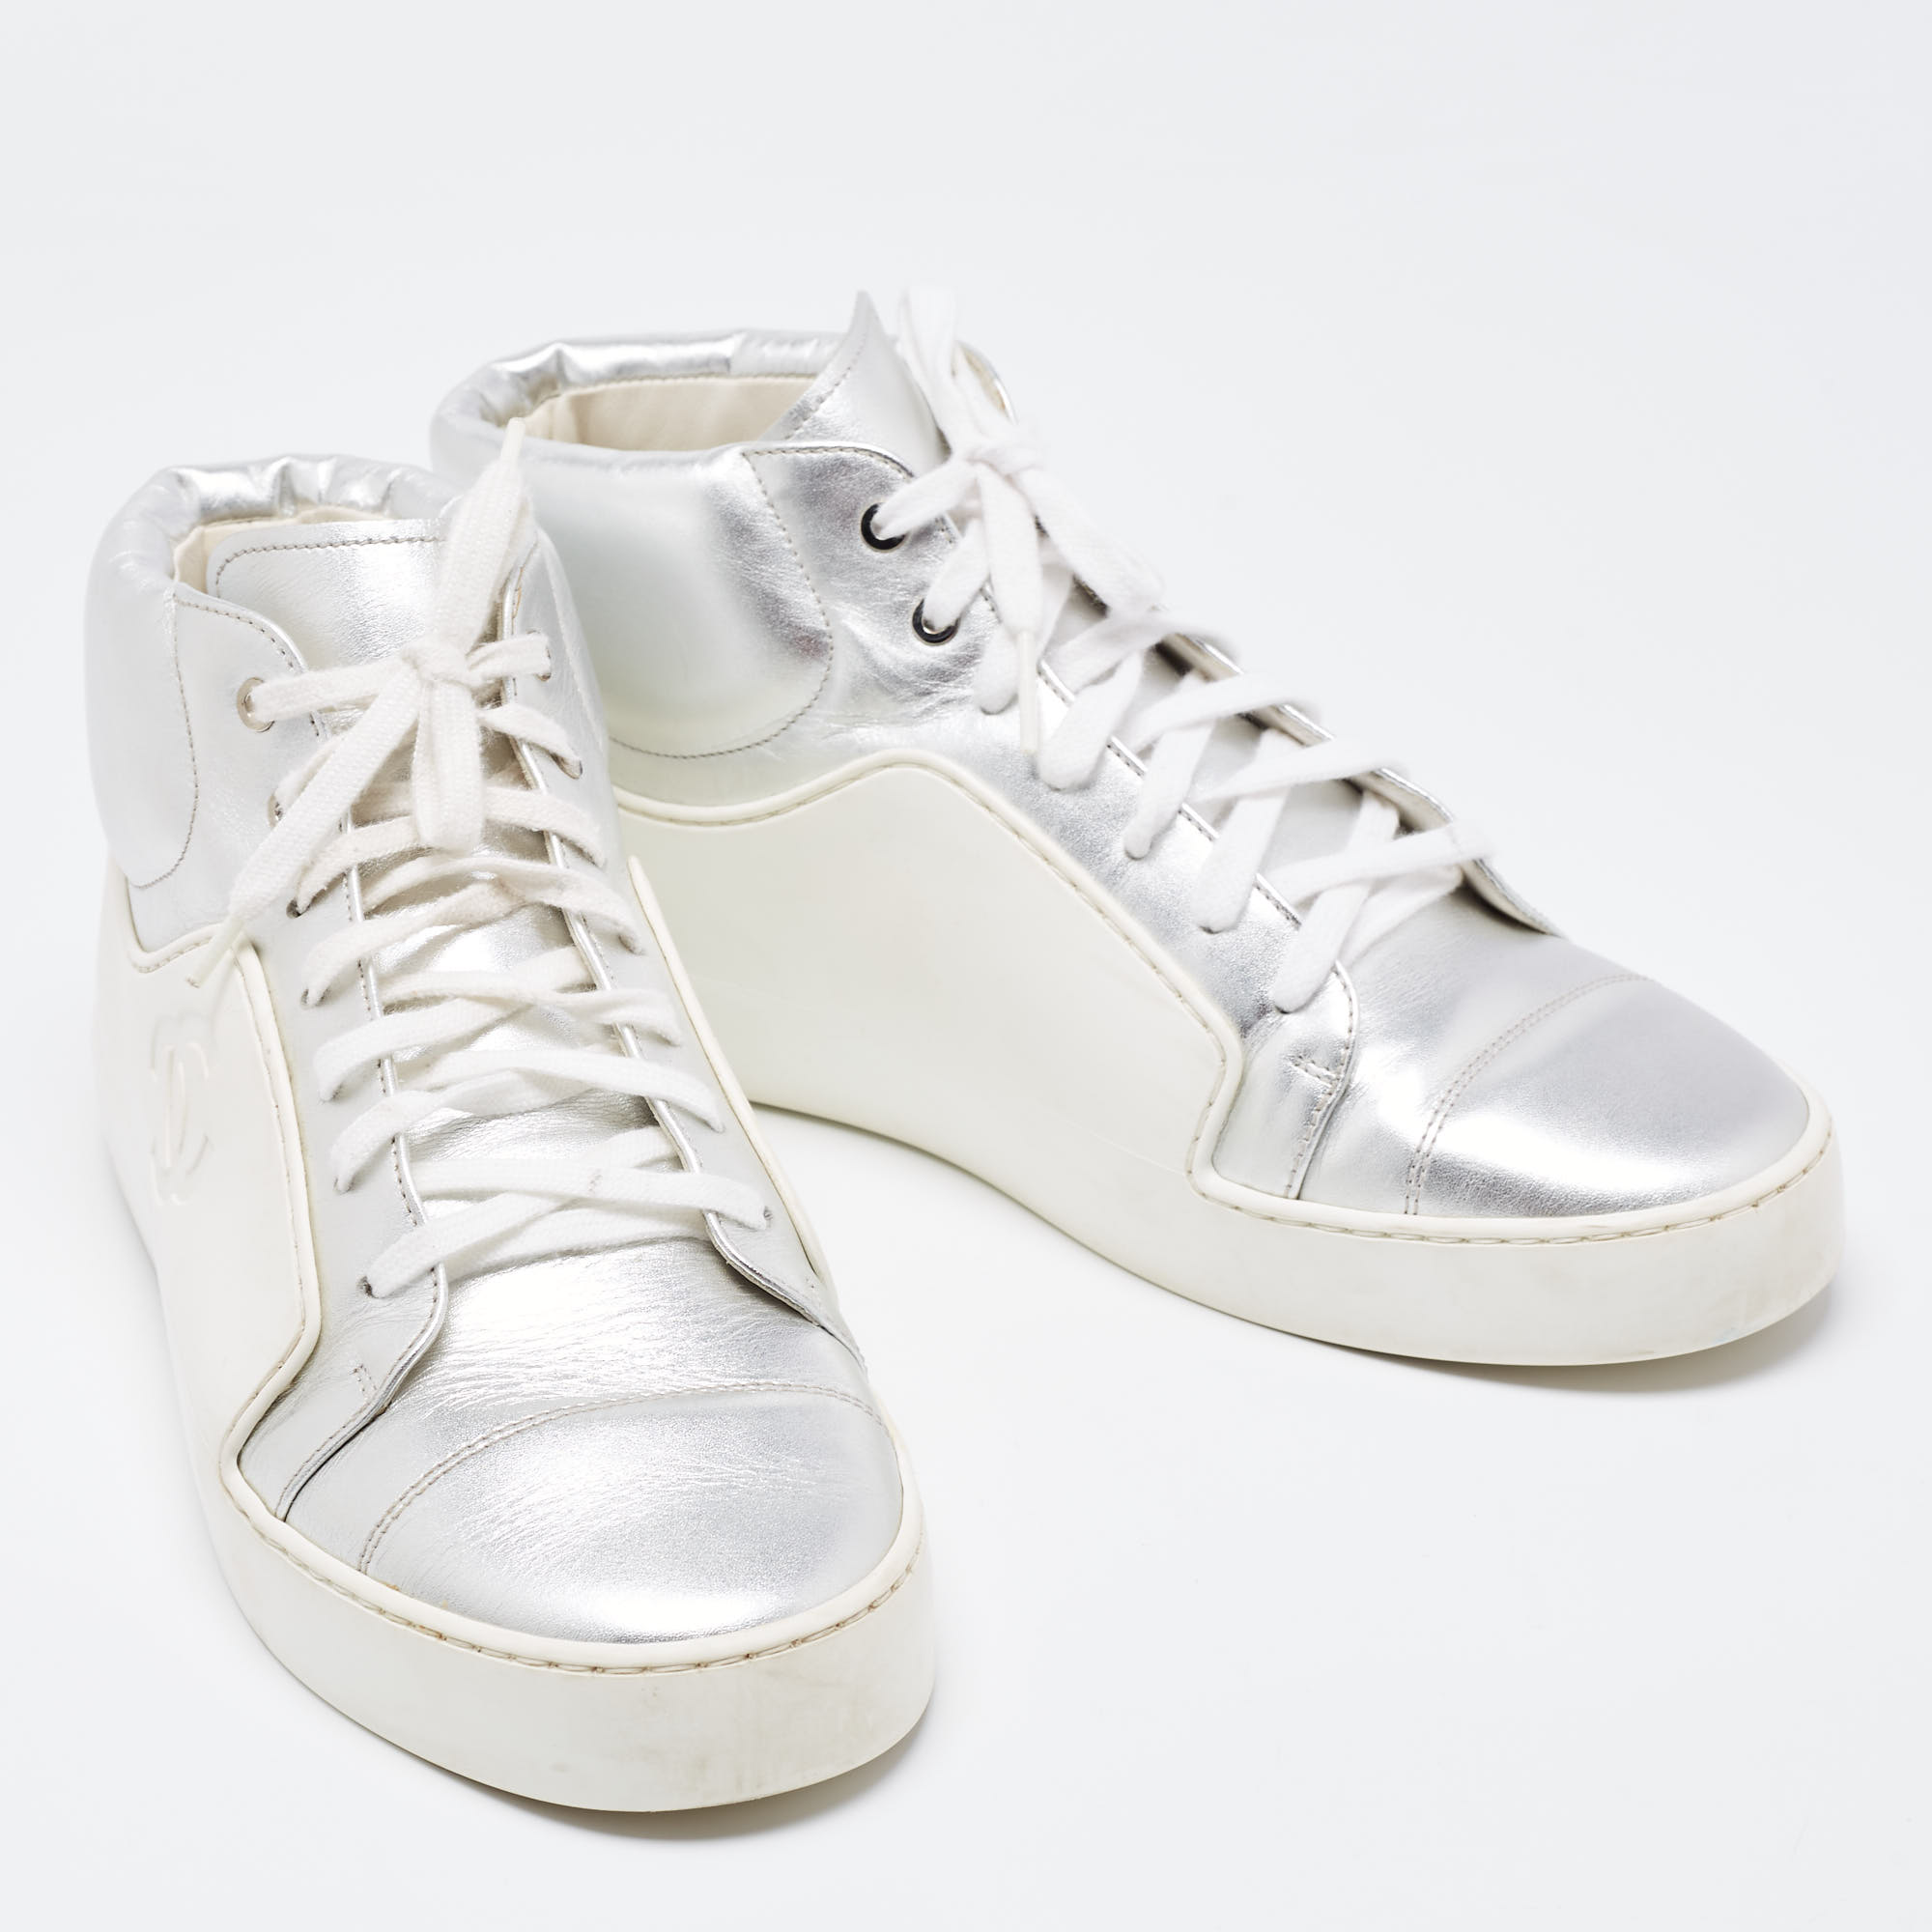 Chanel Metallic Silver/White Leather And Rubber Lace Up High Top Sneakers Size 39.5